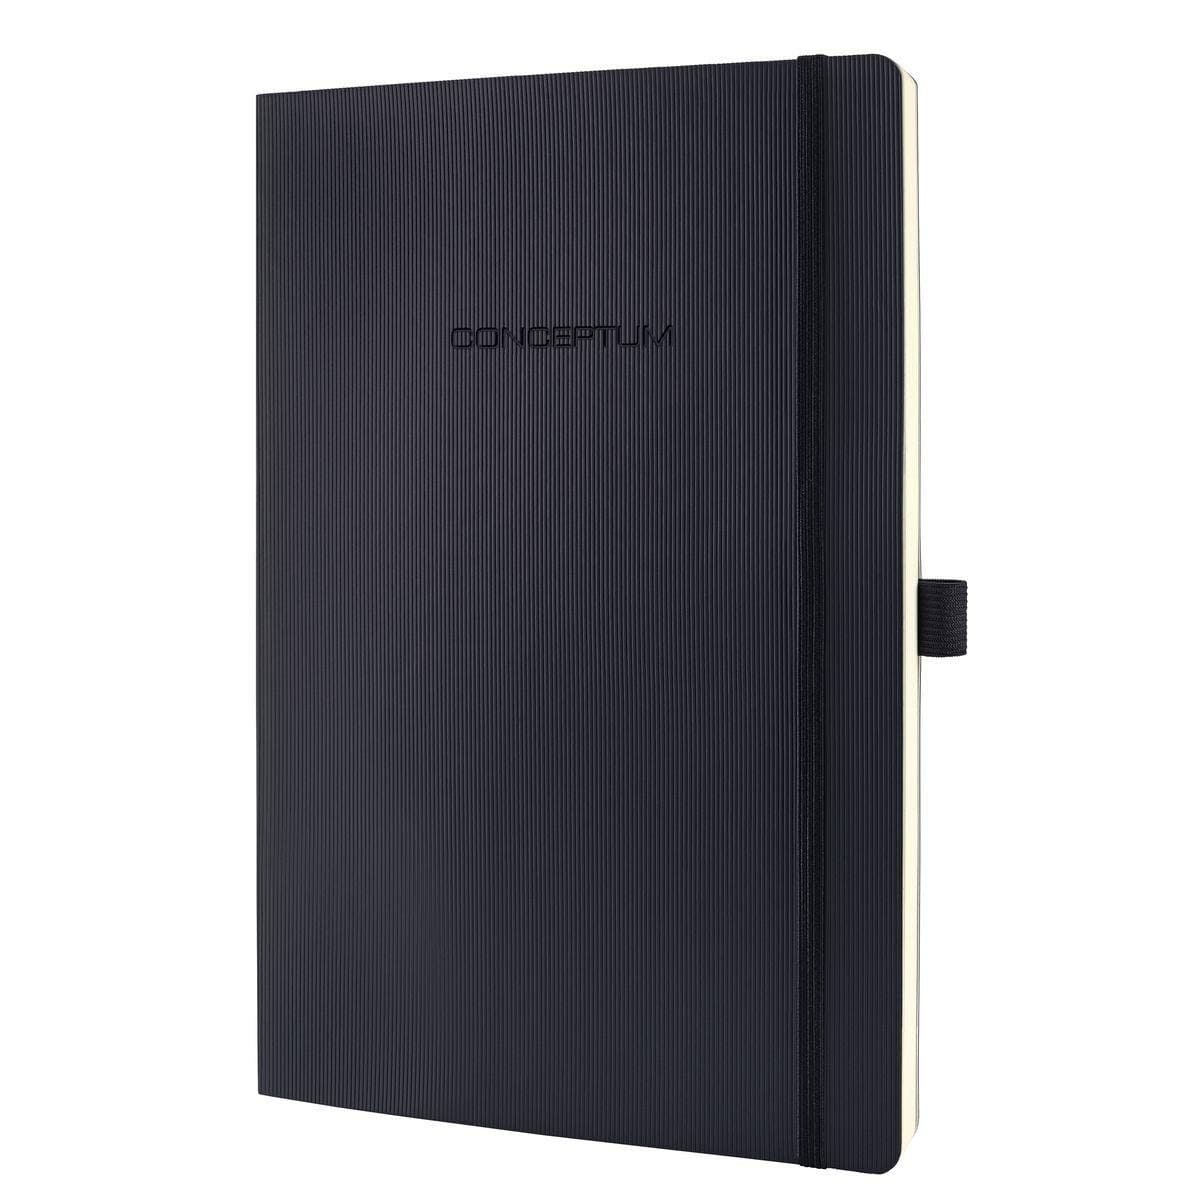 Sigel Notebook CONCEPTUM A4, Softcover, Lined, Black